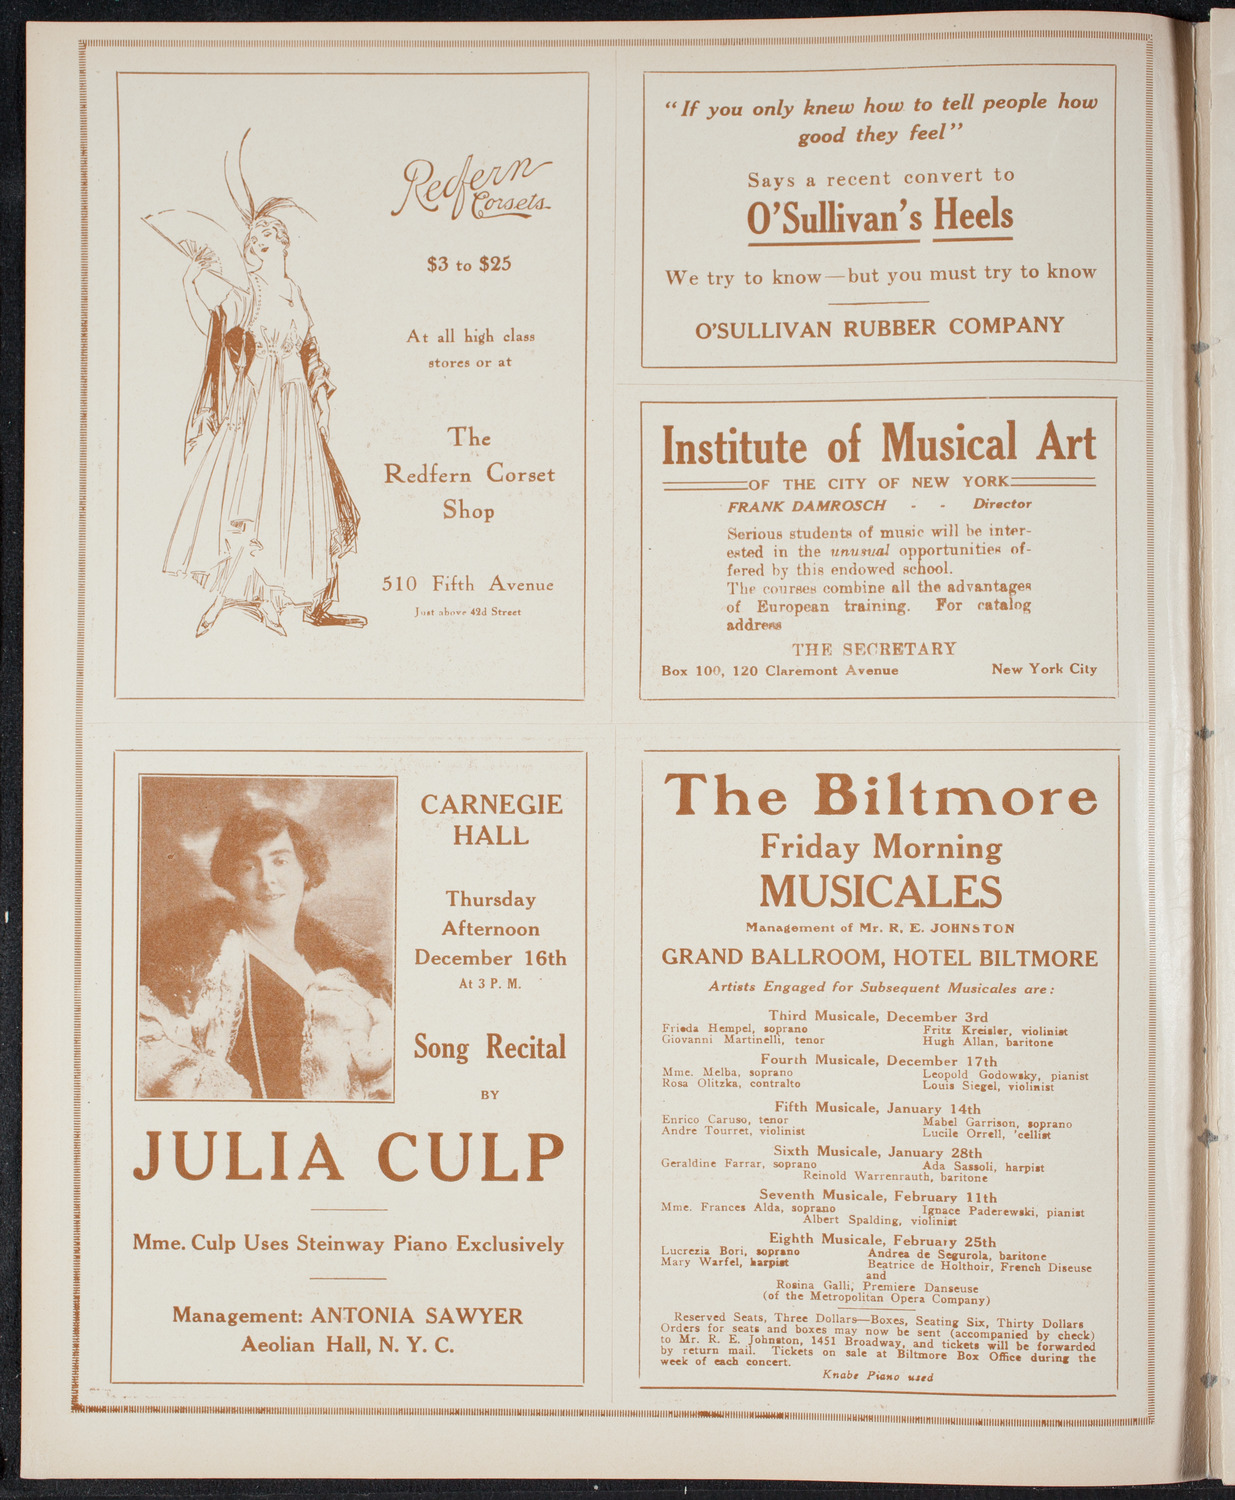 Roy Chandler's South American Series: Spring Byington-Chandler "A Trip to the Argentine", November 25, 1915, program page 2